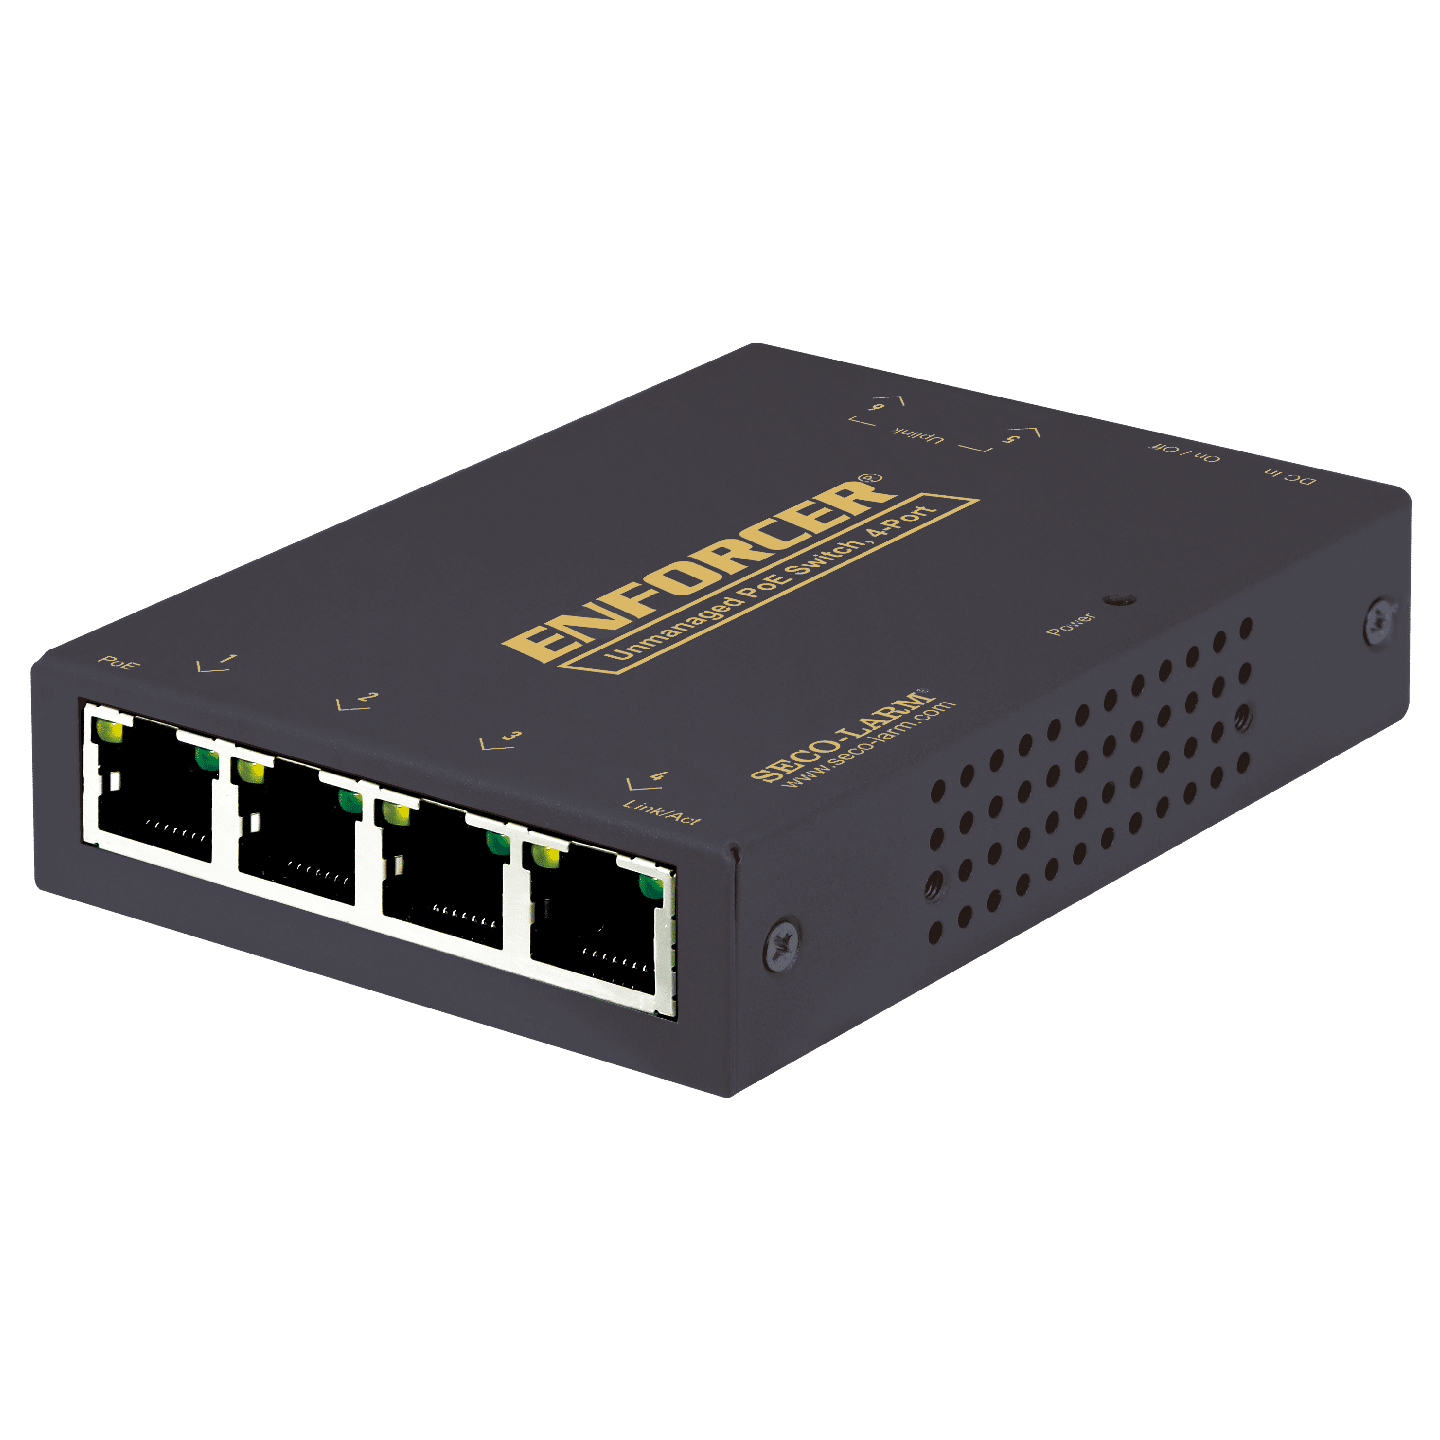 Seco-Larm Enforcer Ethernet Over Coax with PoE